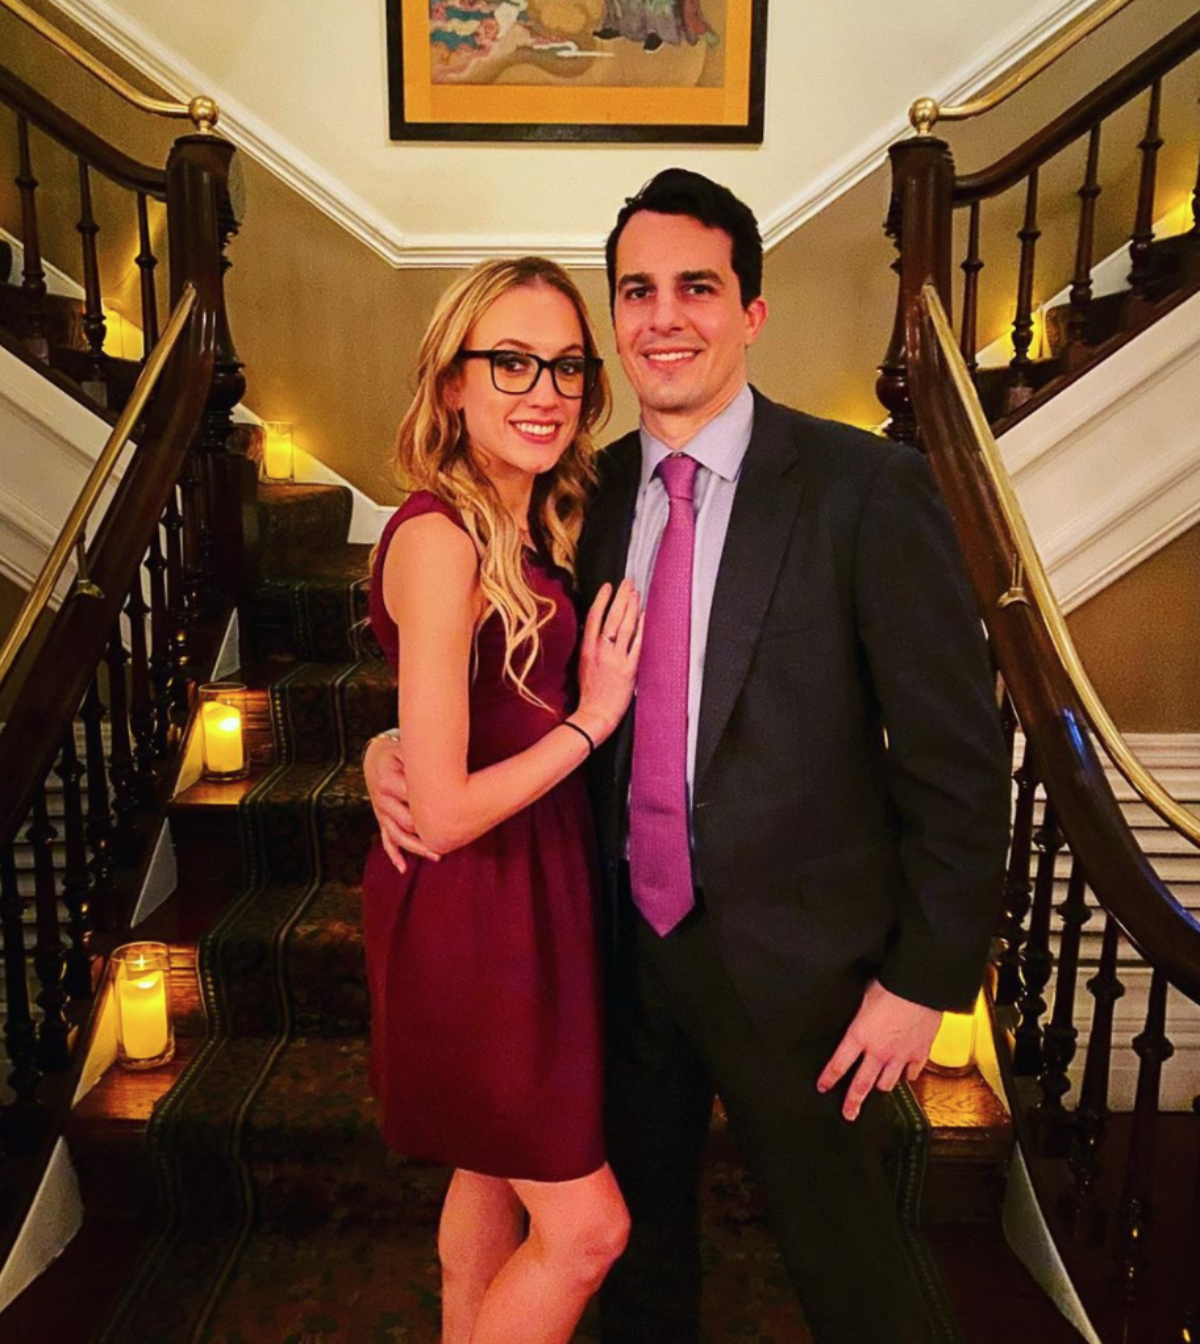 Who Is Cameron Frish, the Fiance of Kat Timpf from Fox News?